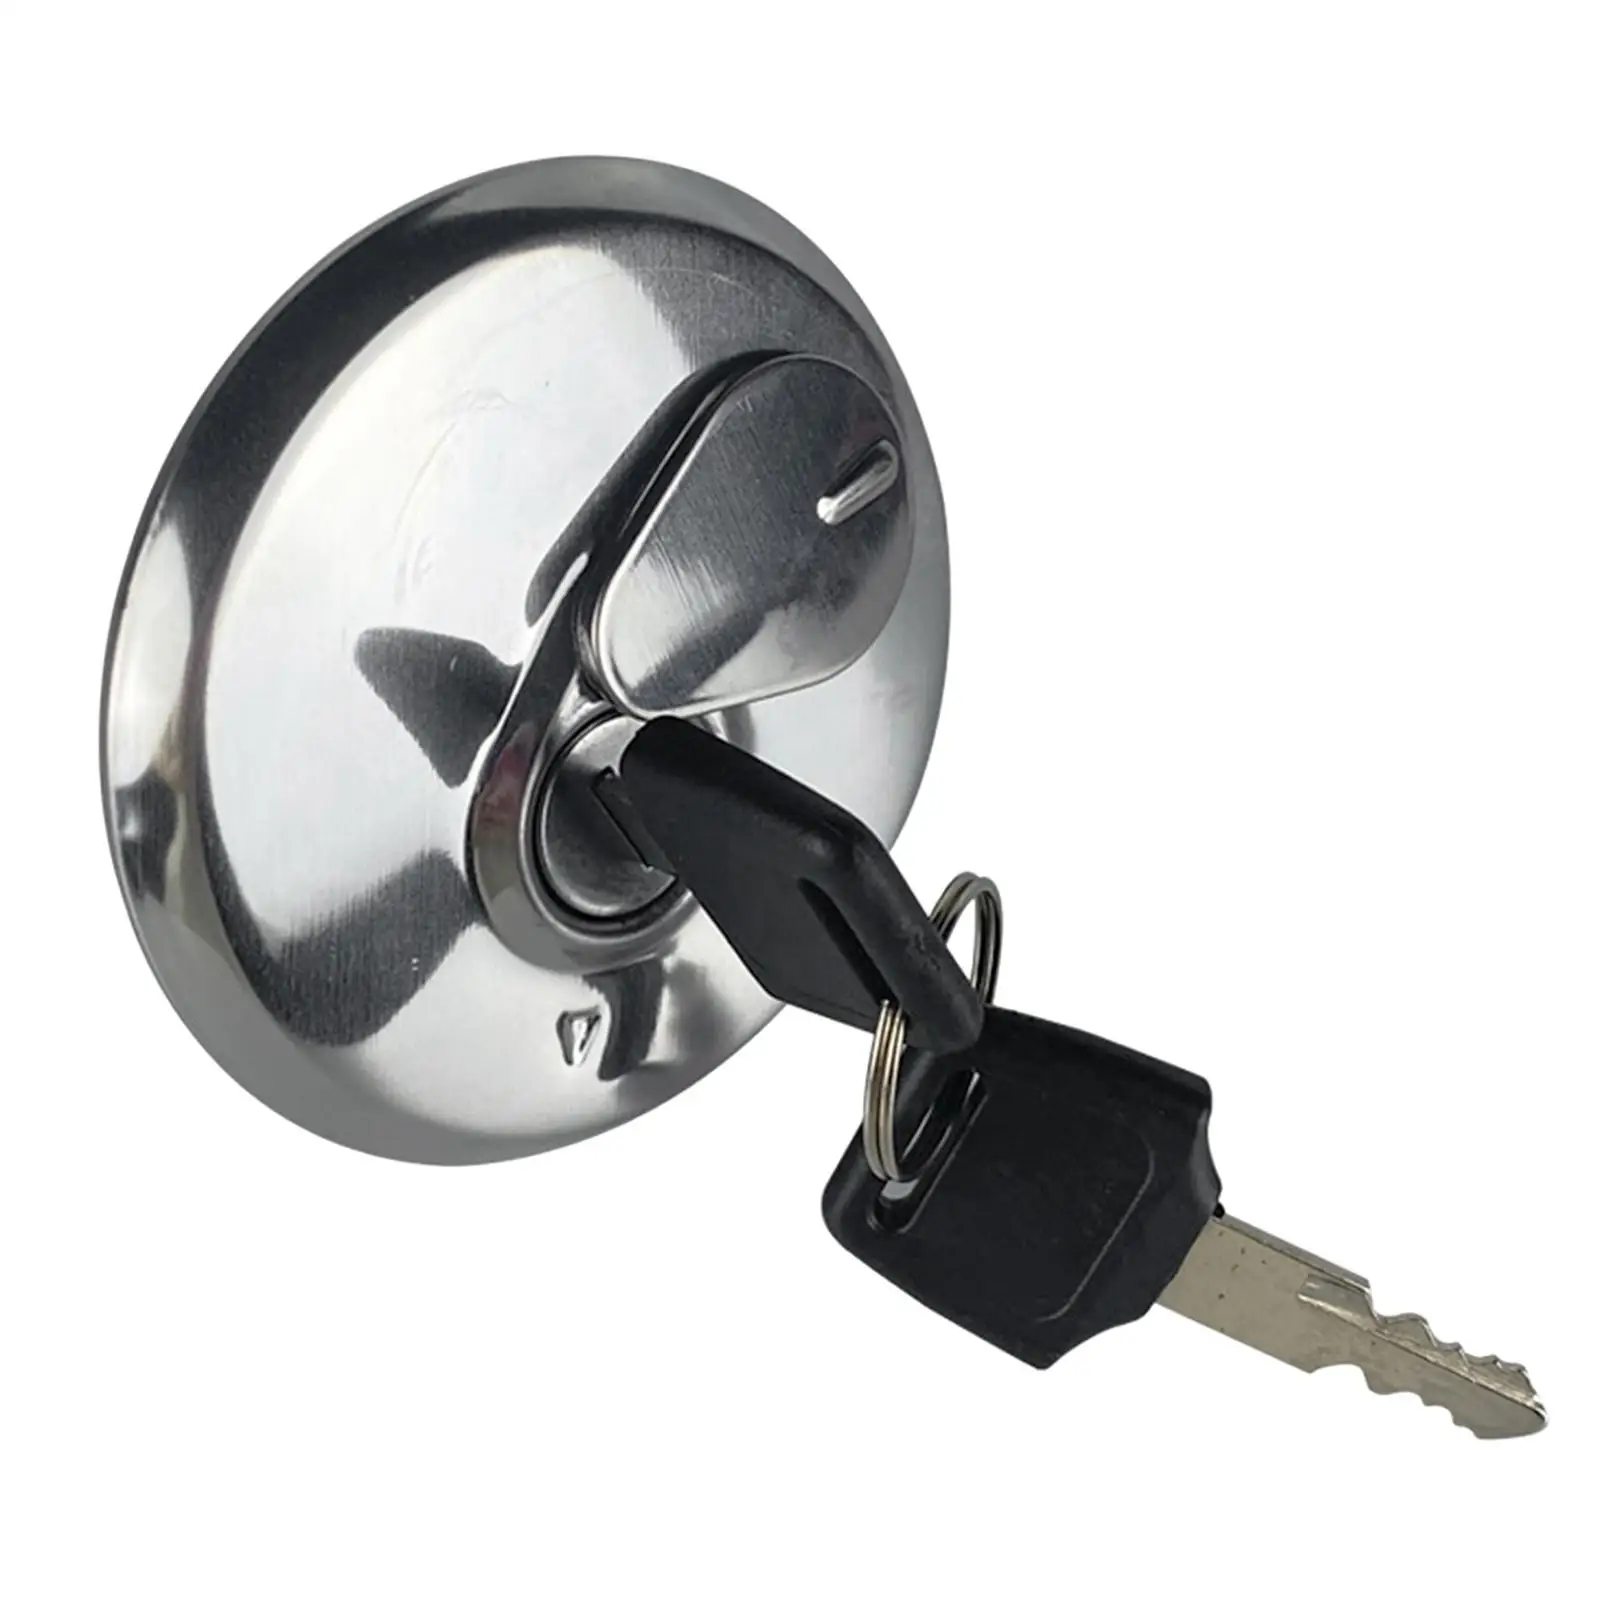 Motorbike Fuel Gas Tank Cap Cover with Lock Keys Replaces for Suzuki Gn125 High Performance Supplies Accessories Parts